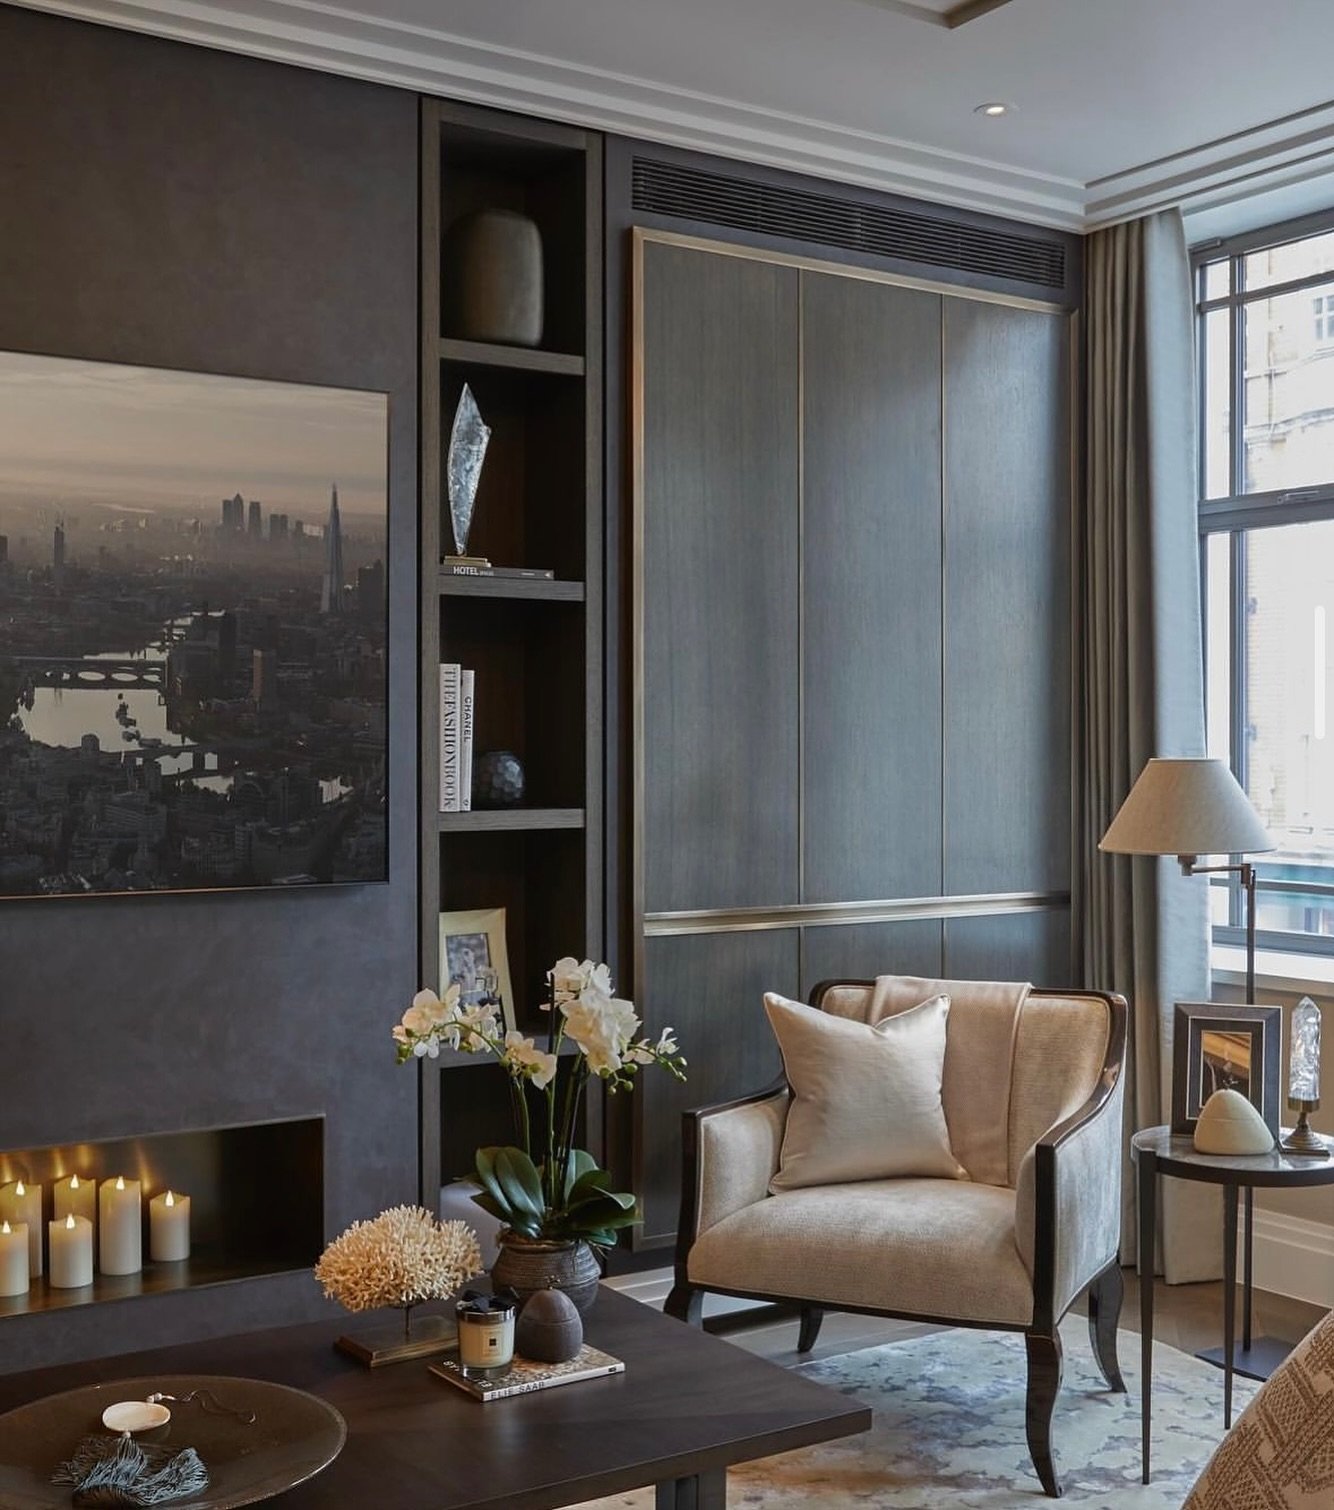 A beautiful timeless interior by @sophiepatersoninteriors 🤍 Brilliant advice about choosing an interior designer too!

#interiordesign #luxuryinteriors #interiordesignlondon